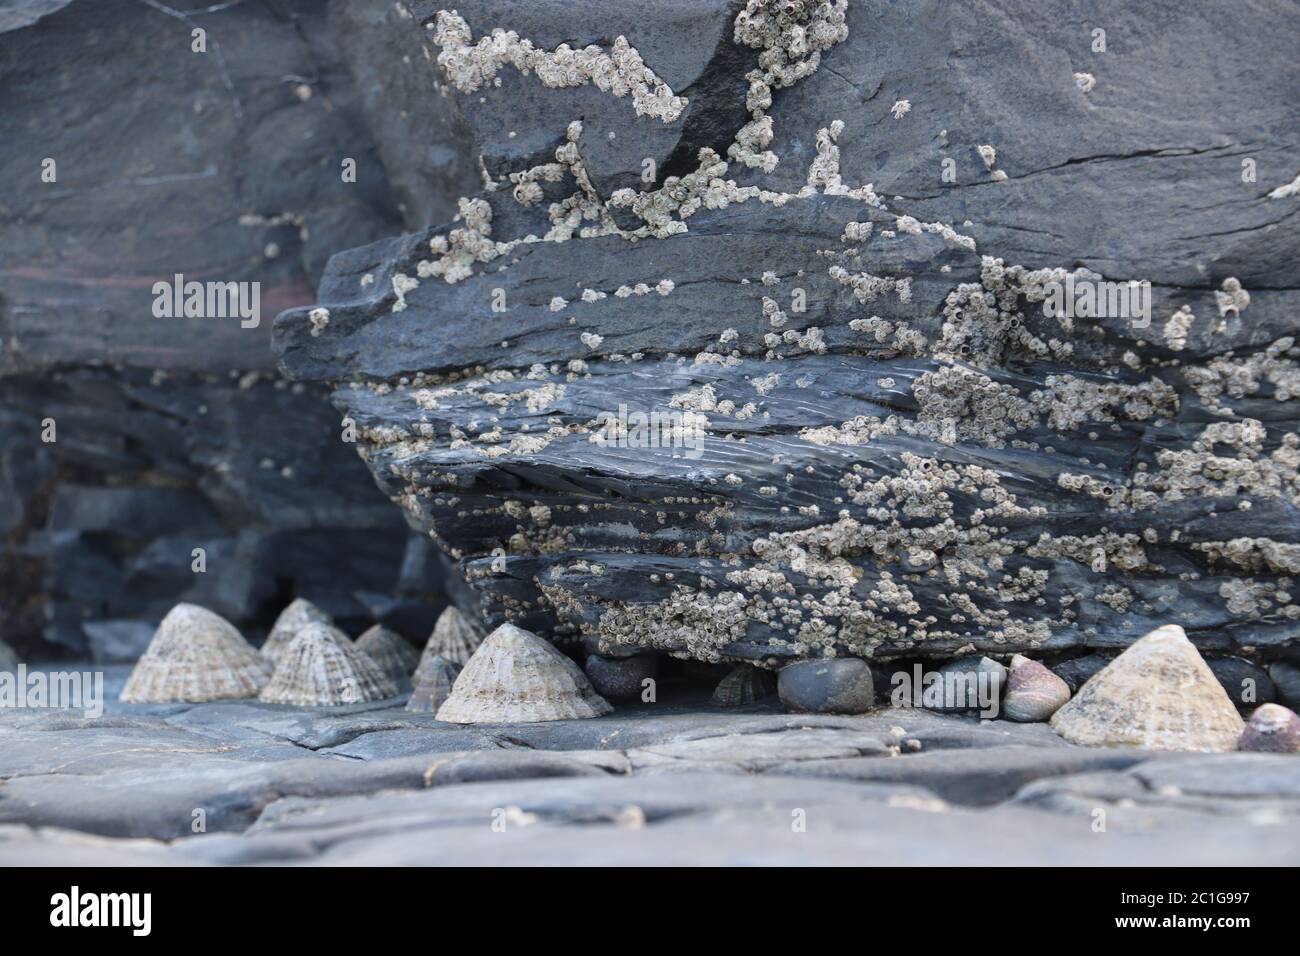 Limpets close up hiding under rock covered in barnacles with two small snails  Stock Photo